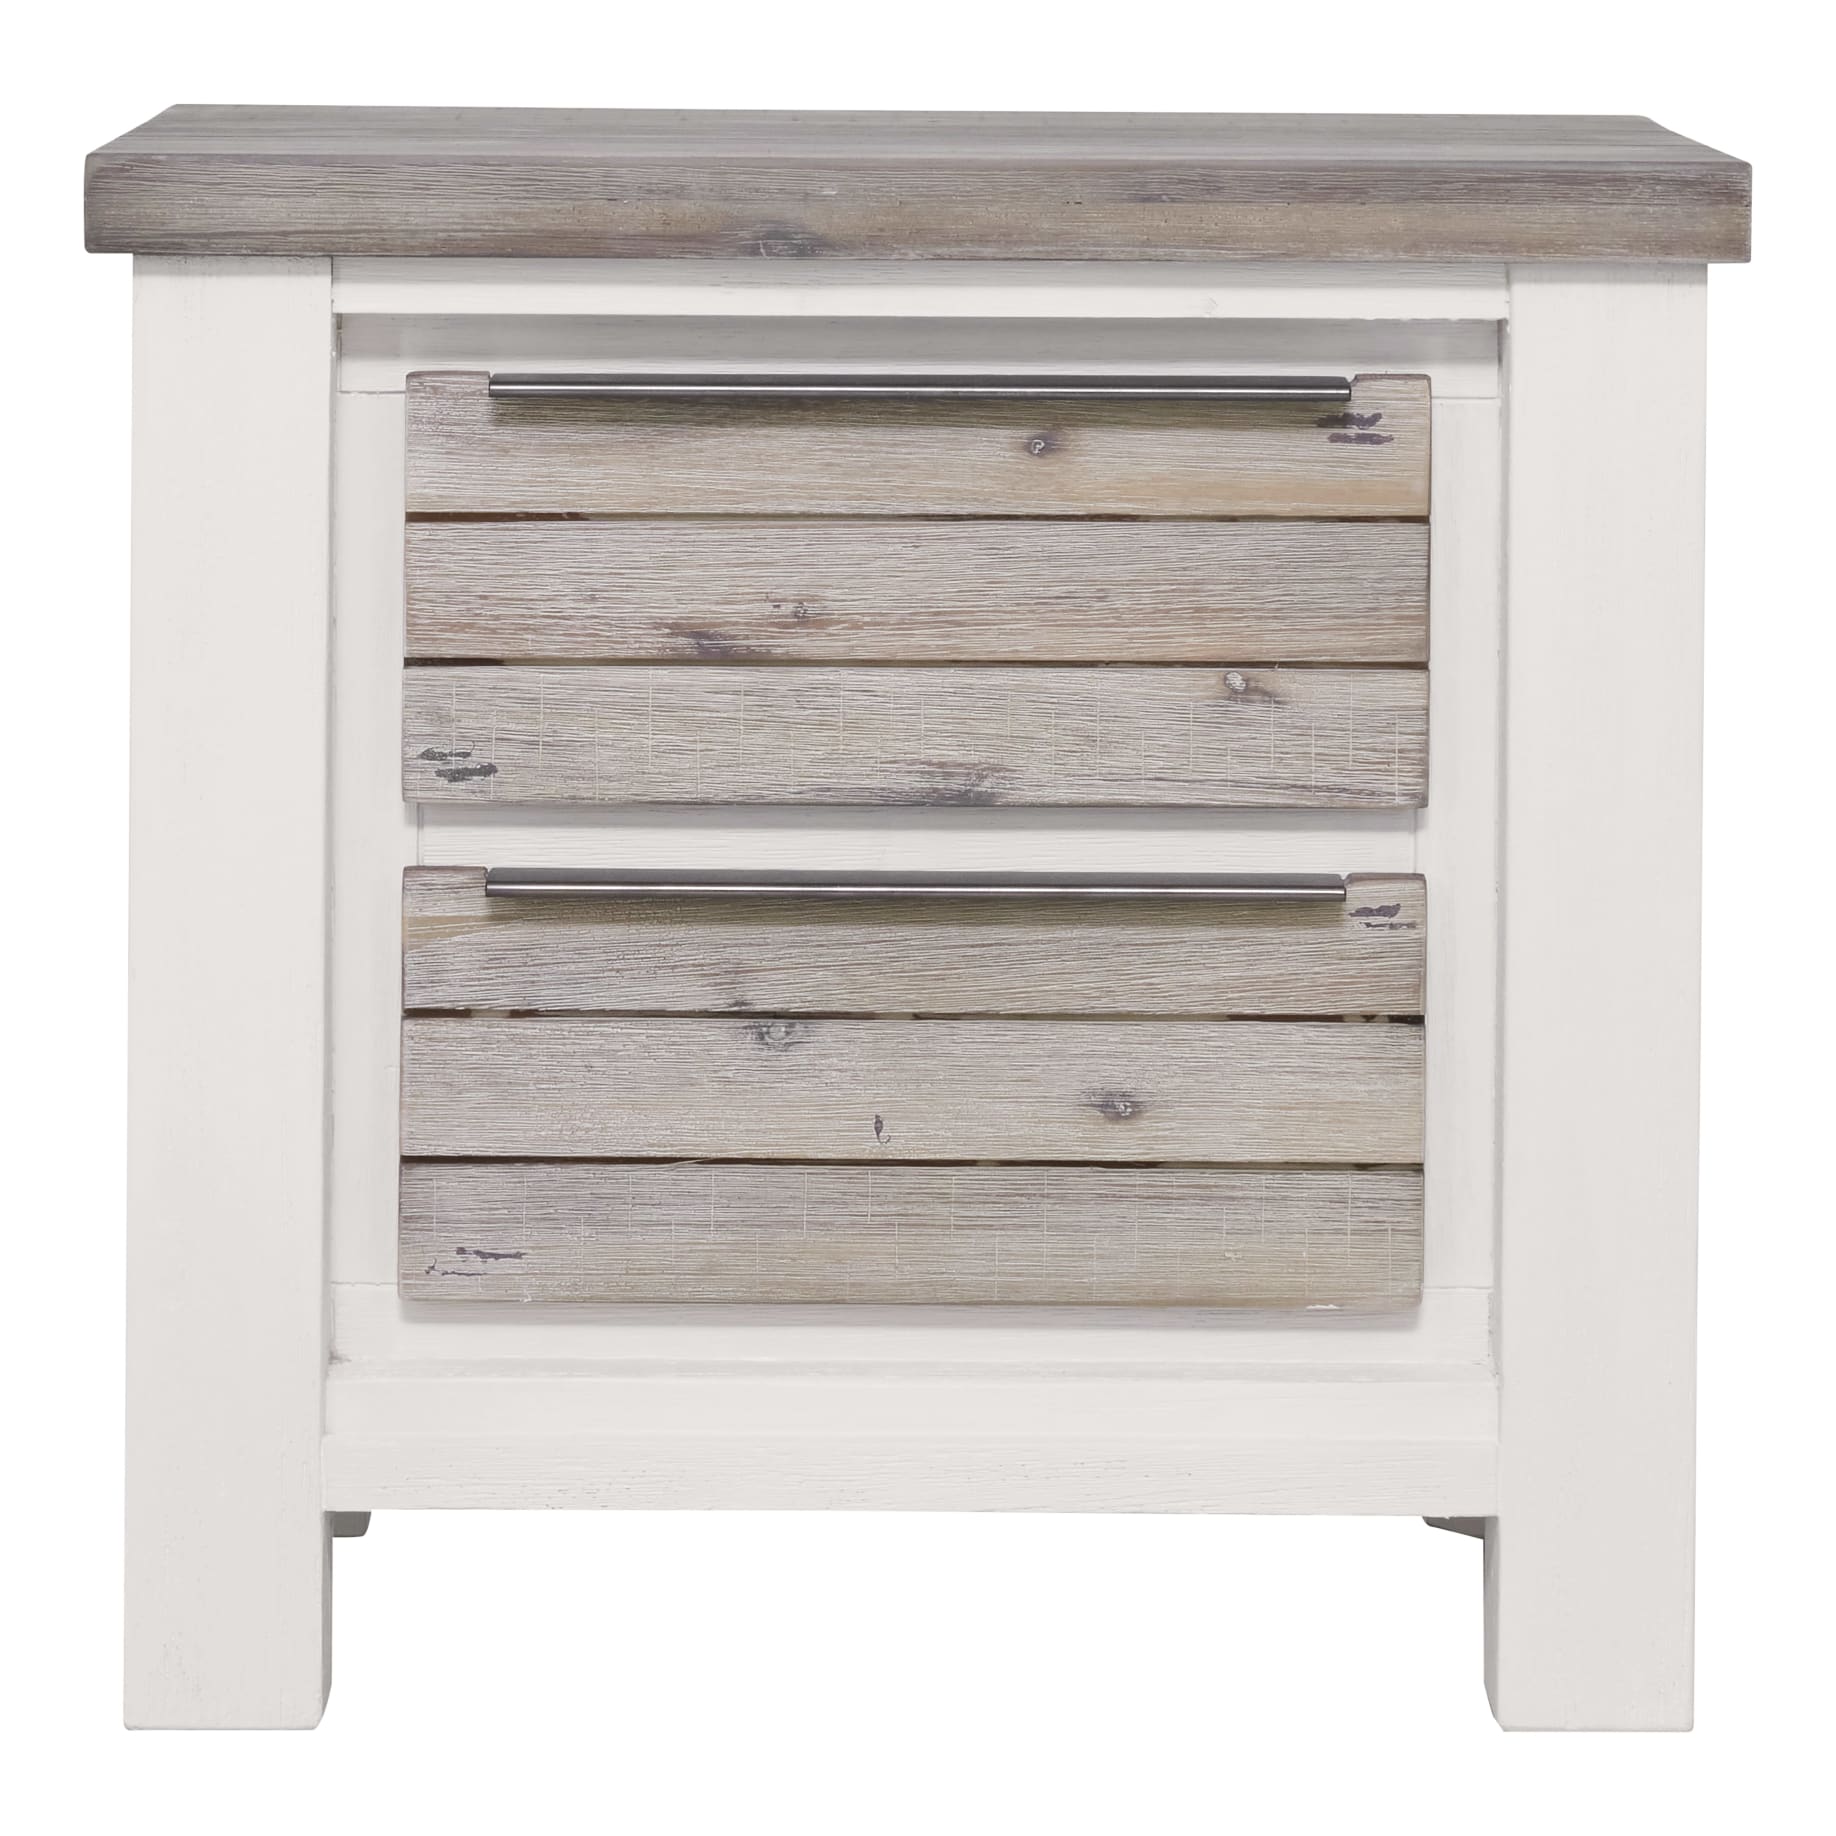 Halifax Bedside Table in Acacia Timber Grey